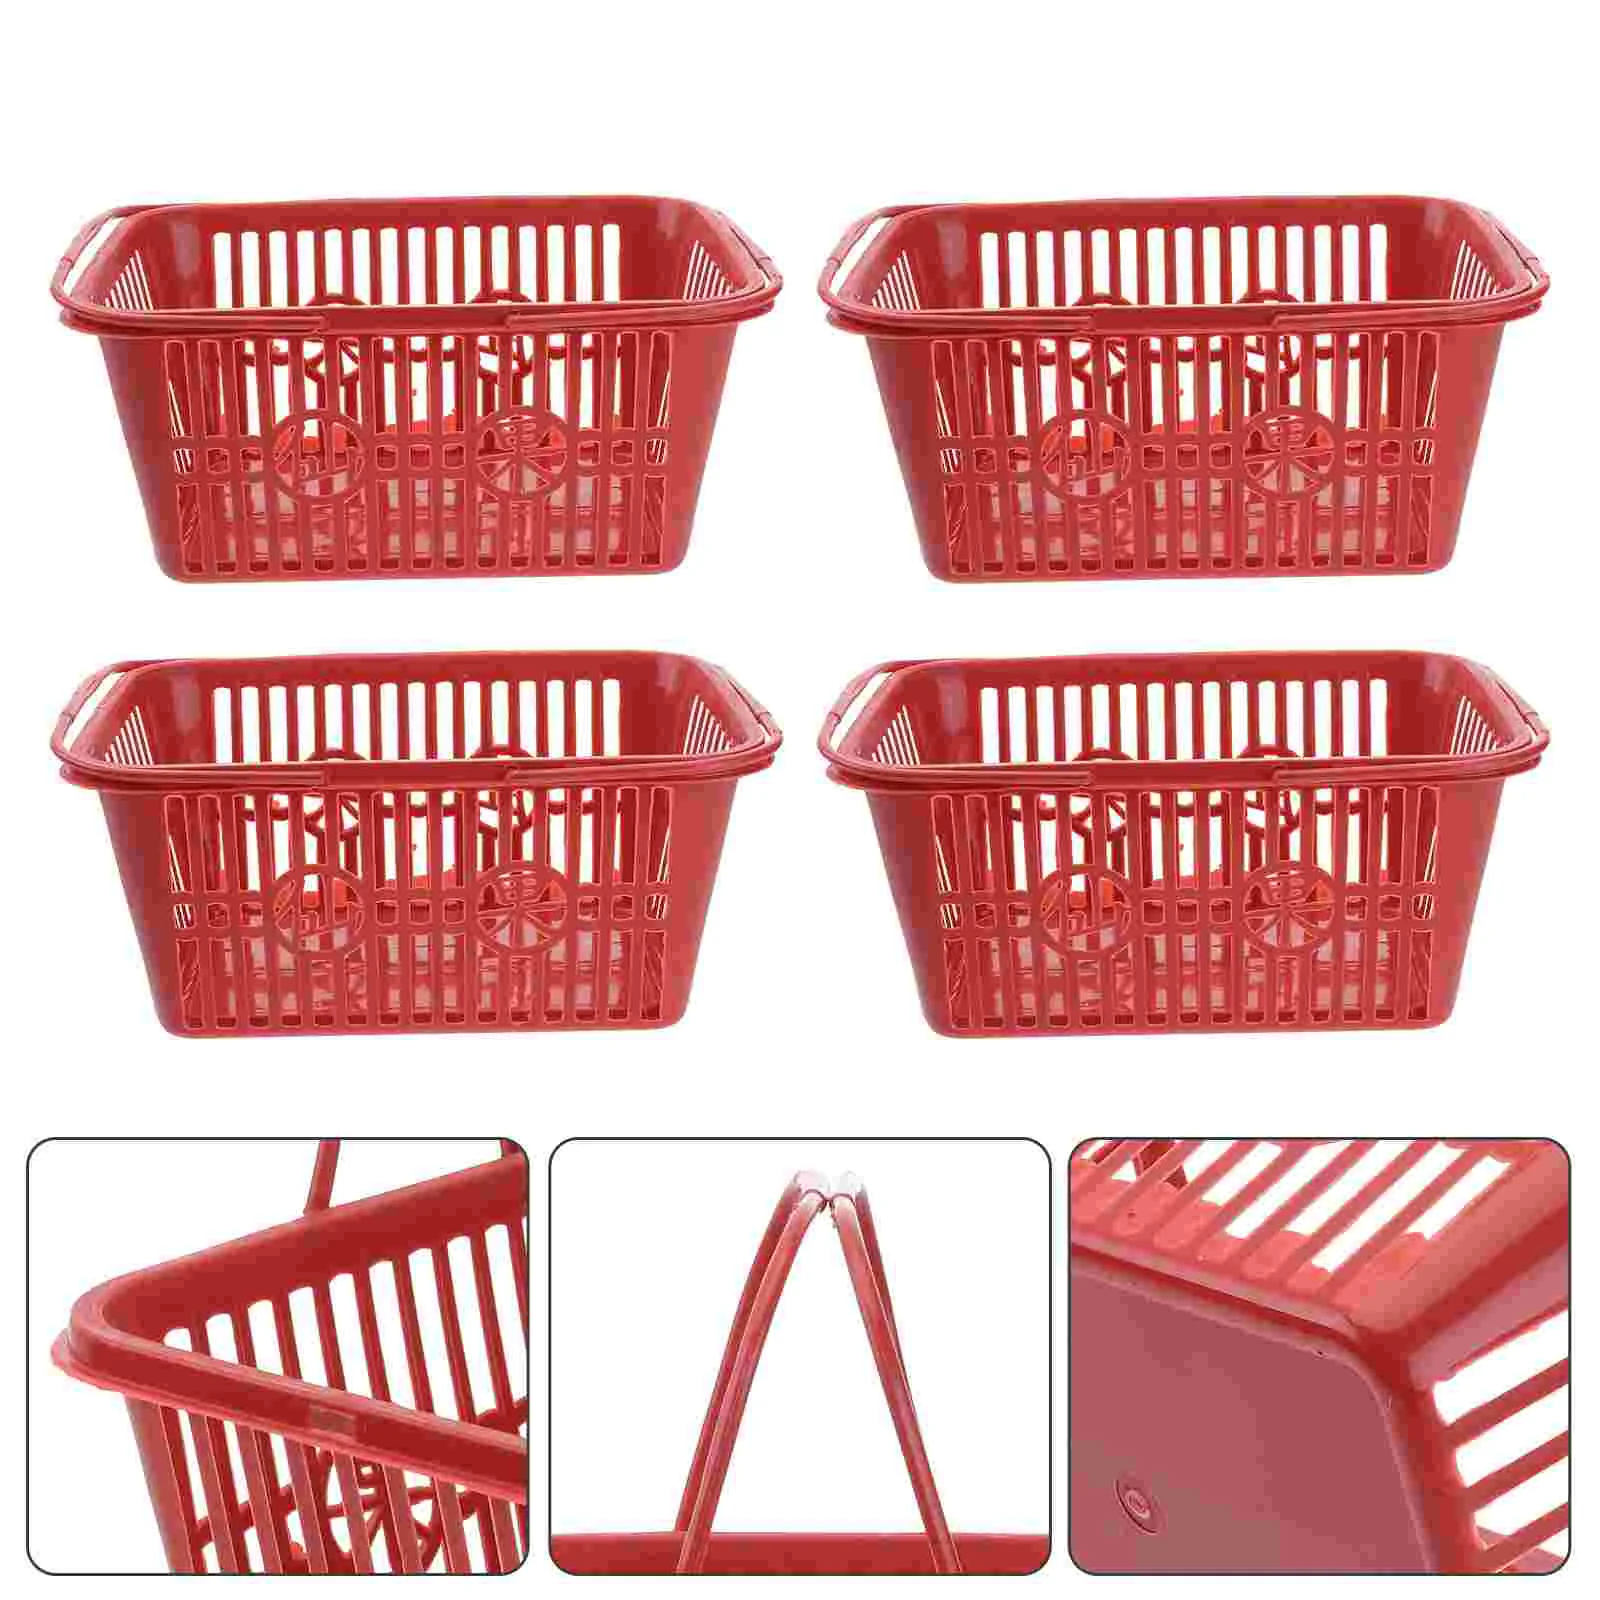 

8 Pcs Fruit Picking Basket Practical Snack Container Strawberry Cherry Plastic Home Storage Child Baskets